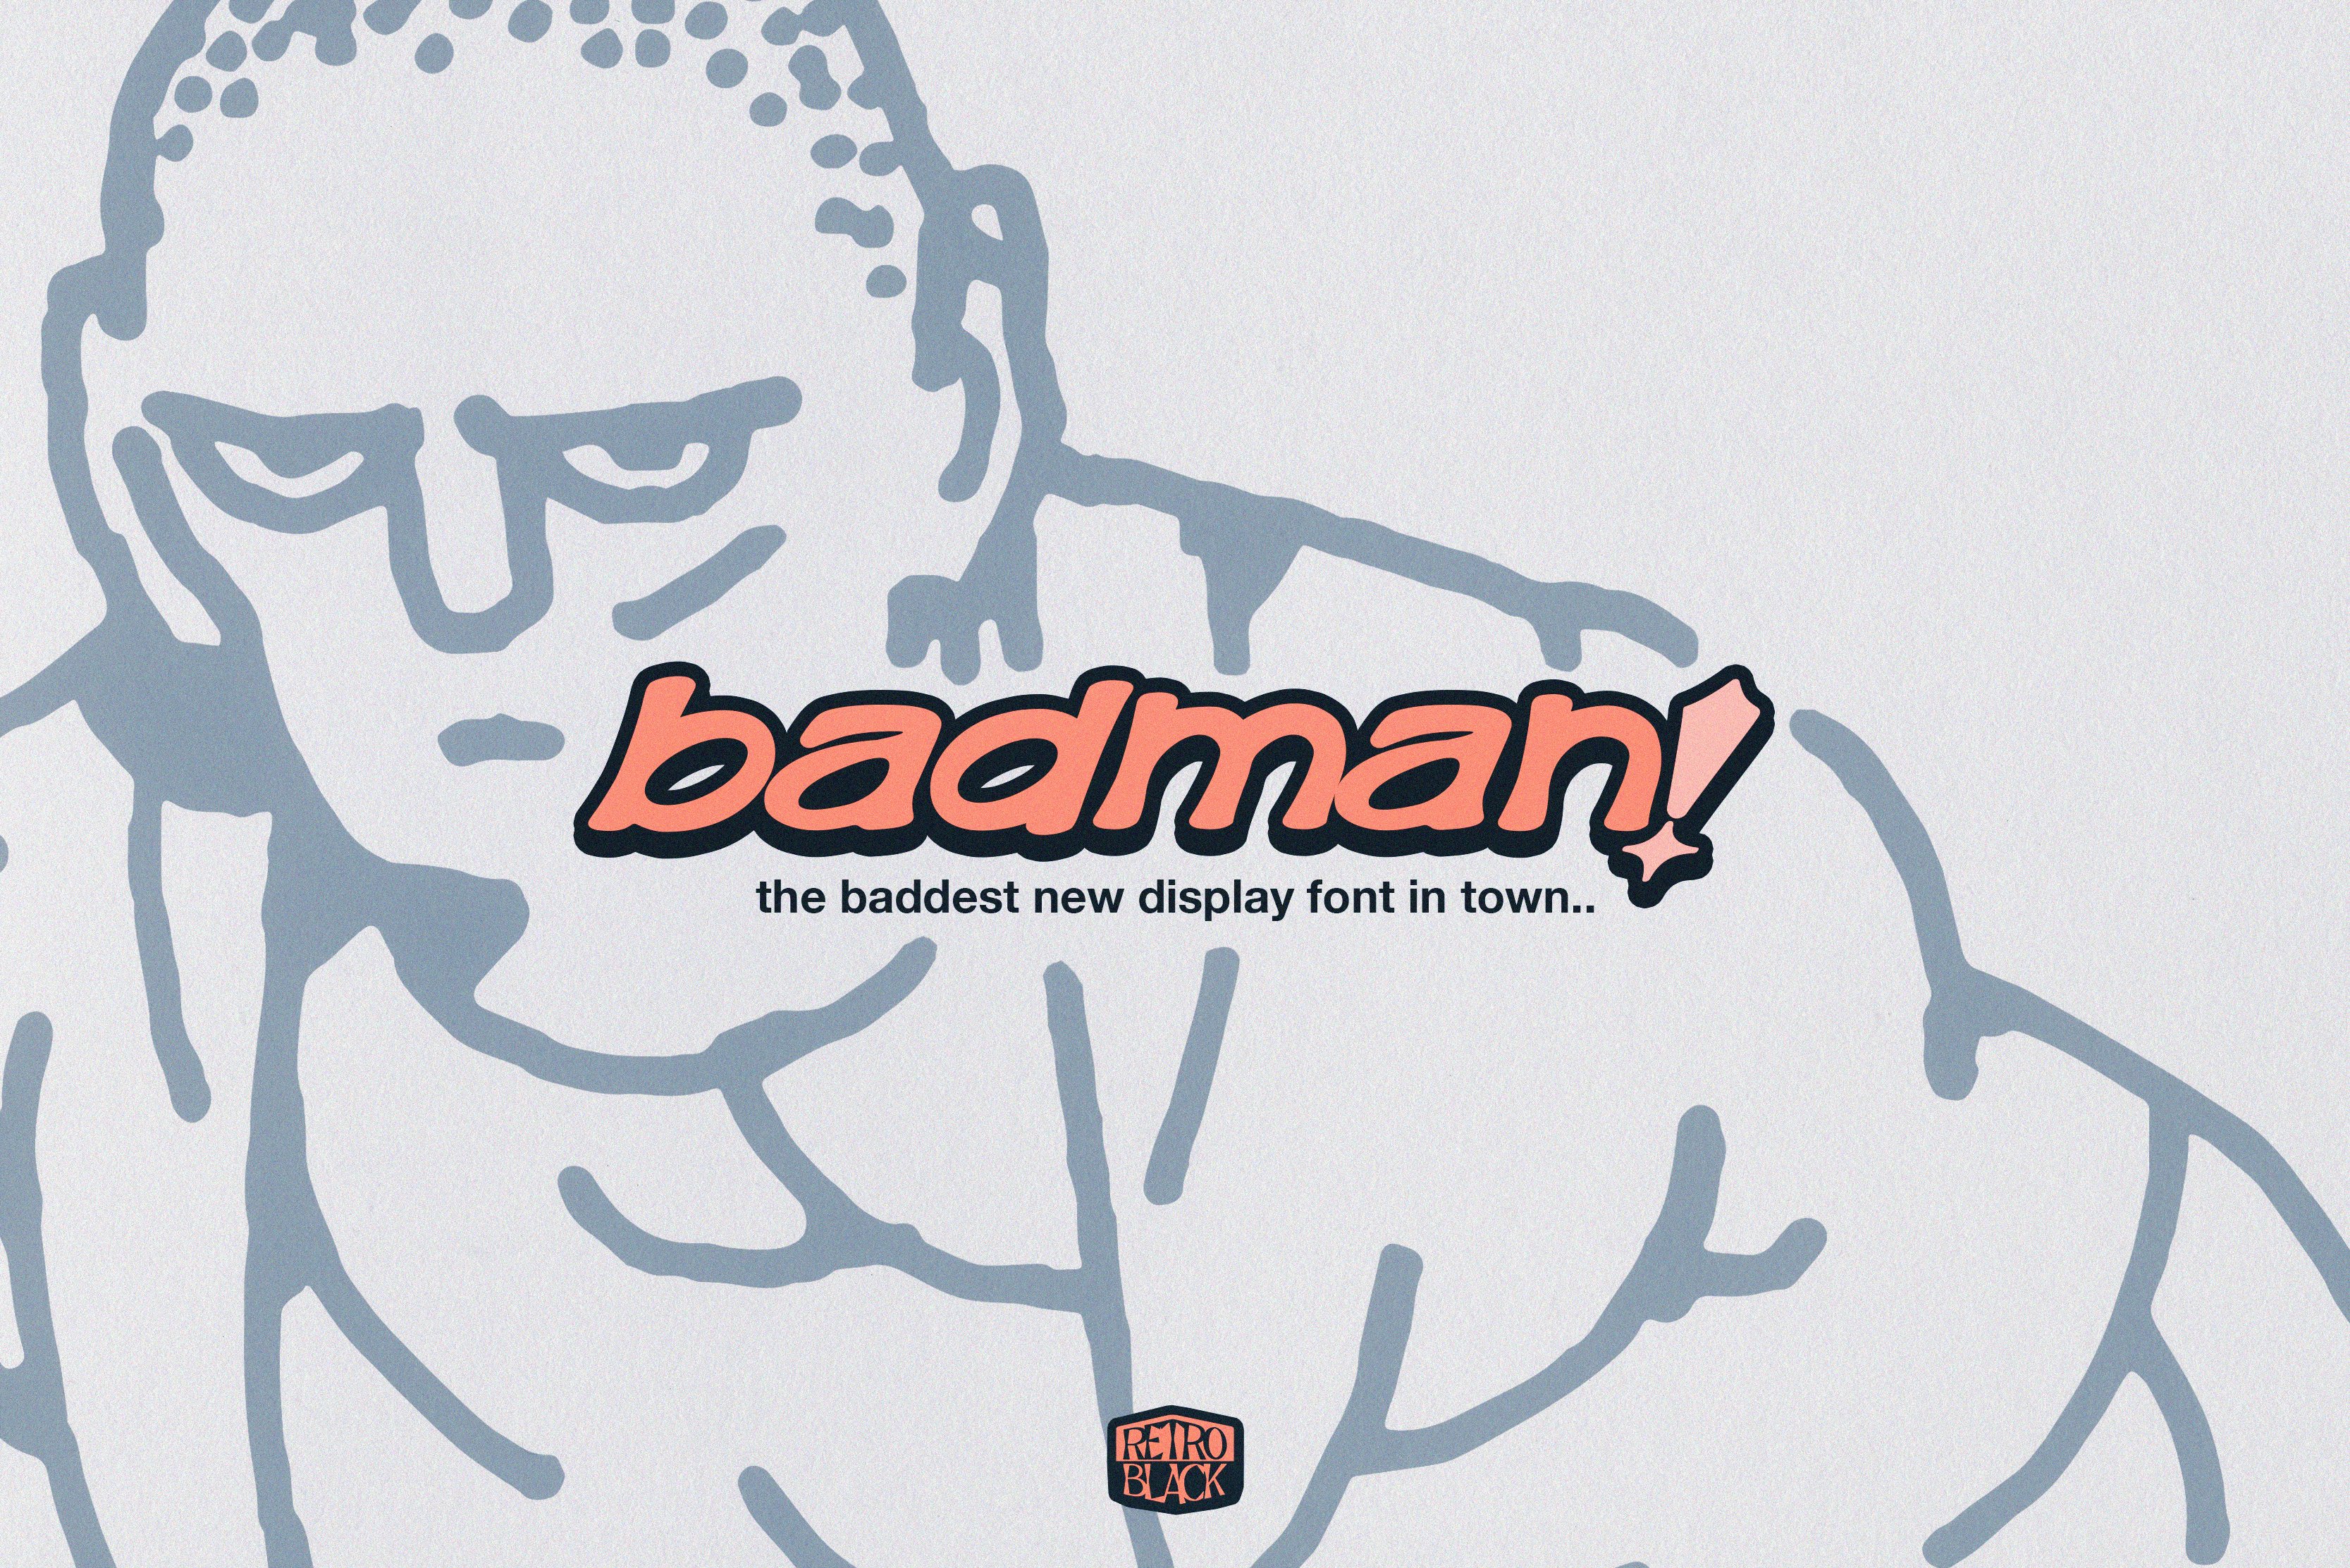 BADMAN - THE BADDEST FONT IN TOWN cover image.